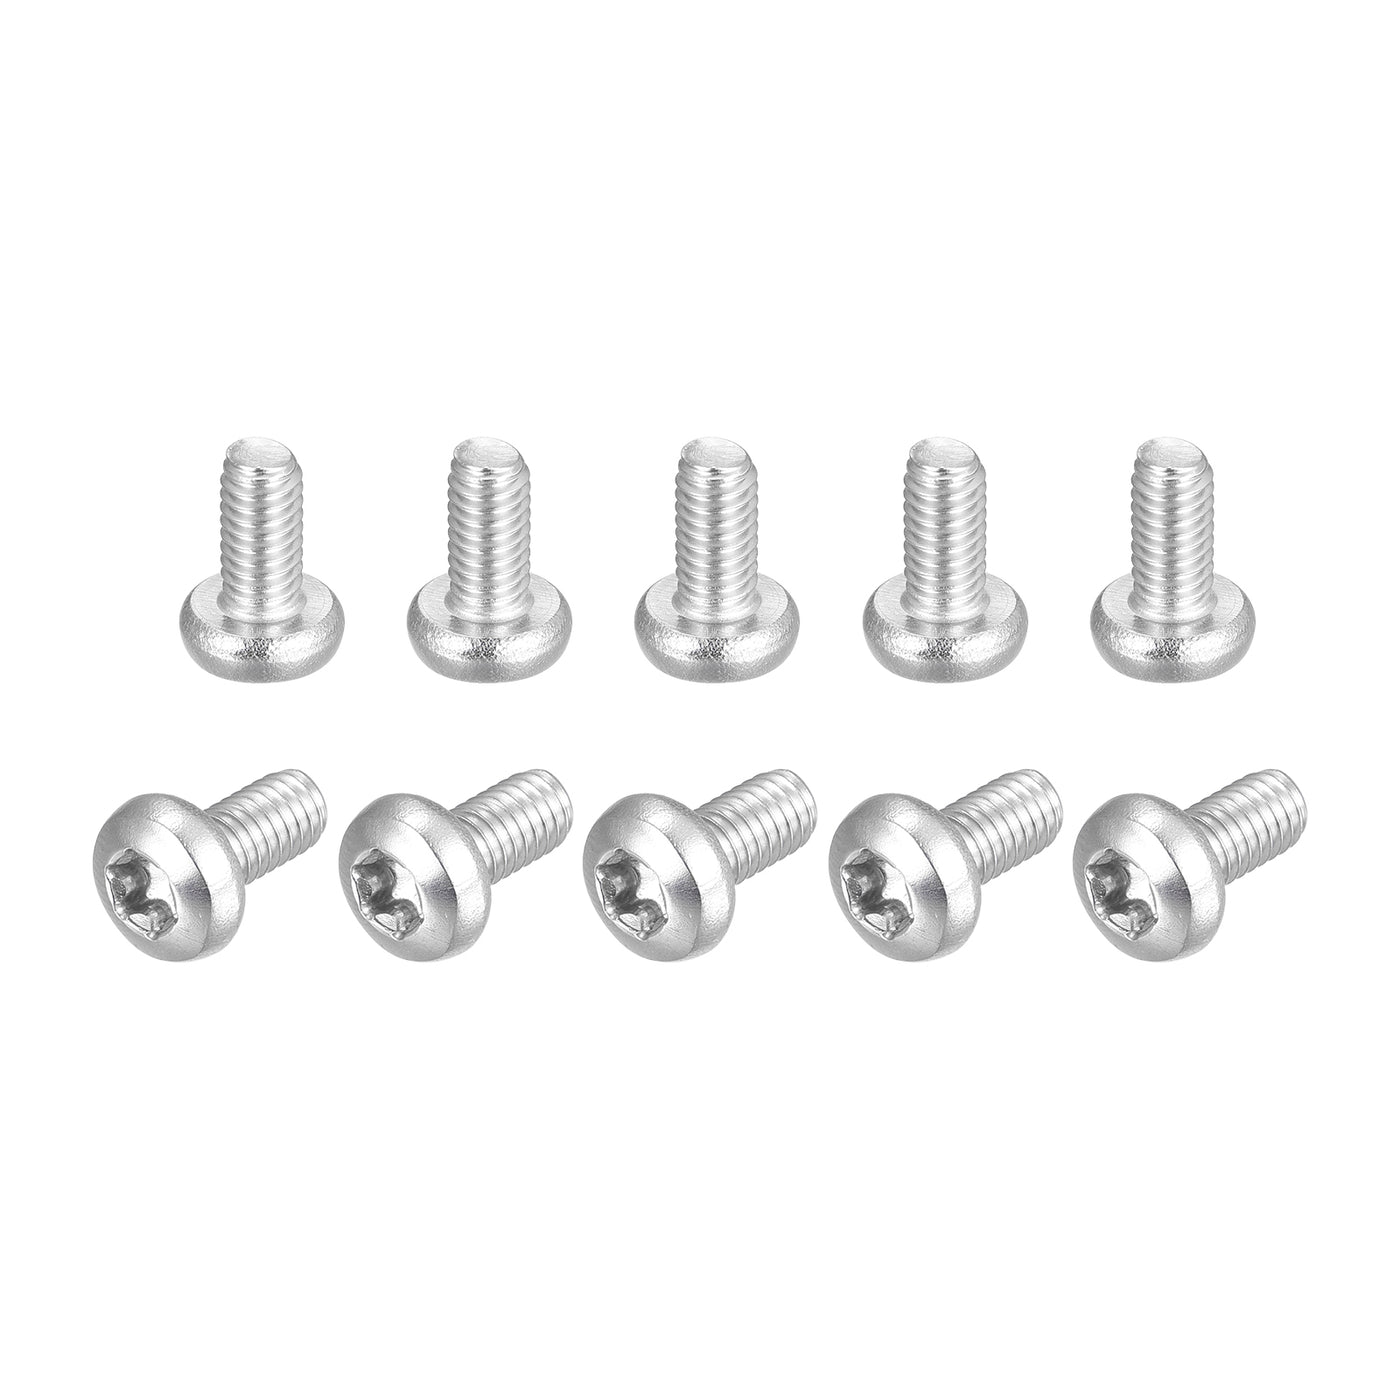 uxcell Uxcell M4x8mm Torx Security Machine Screws, 20pcs 316 Stainless Steel Pan Head Screw